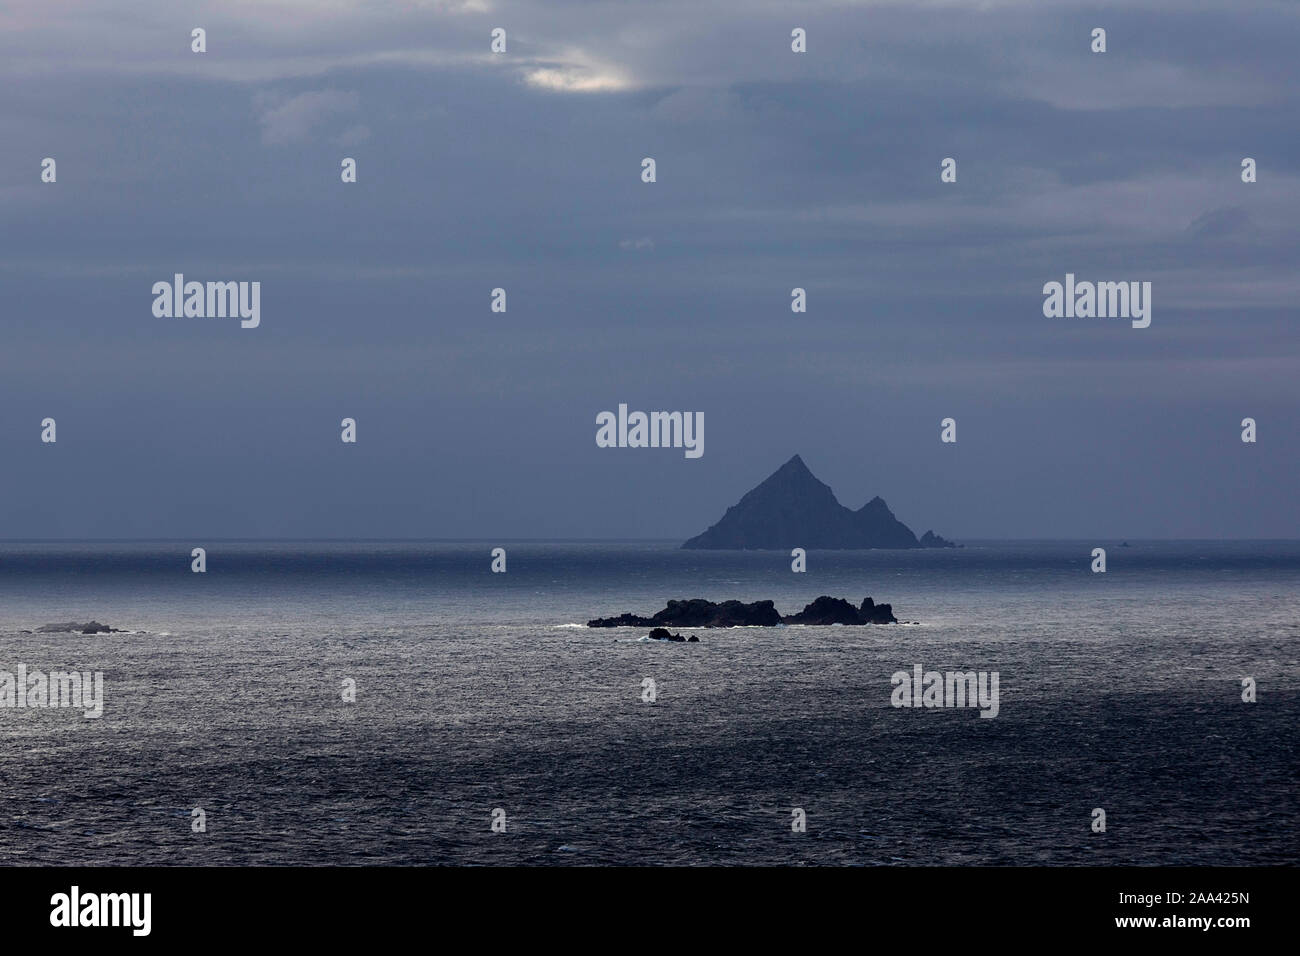 View over Skellig islands from distance in stormy weather, Ireland Stock Photo